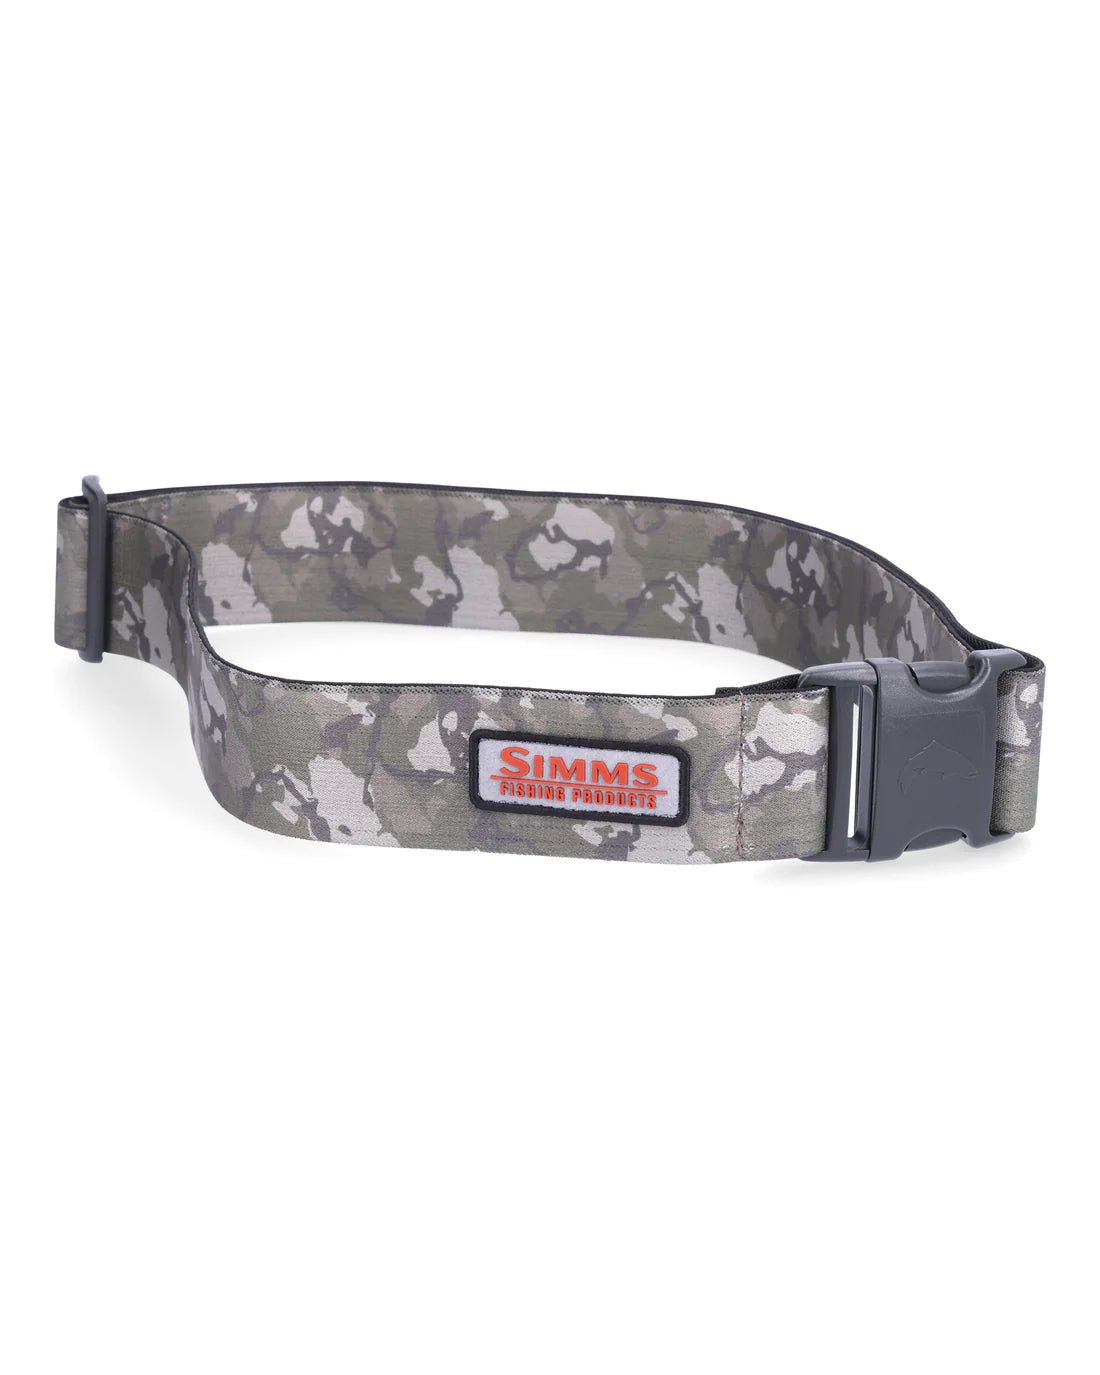 Simms Wading Belt 2 Inch - 2 INCH / REGIMENT CAMO OLIVE DRAB - Mansfield Hunting & Fishing - Products to prepare for Corona Virus